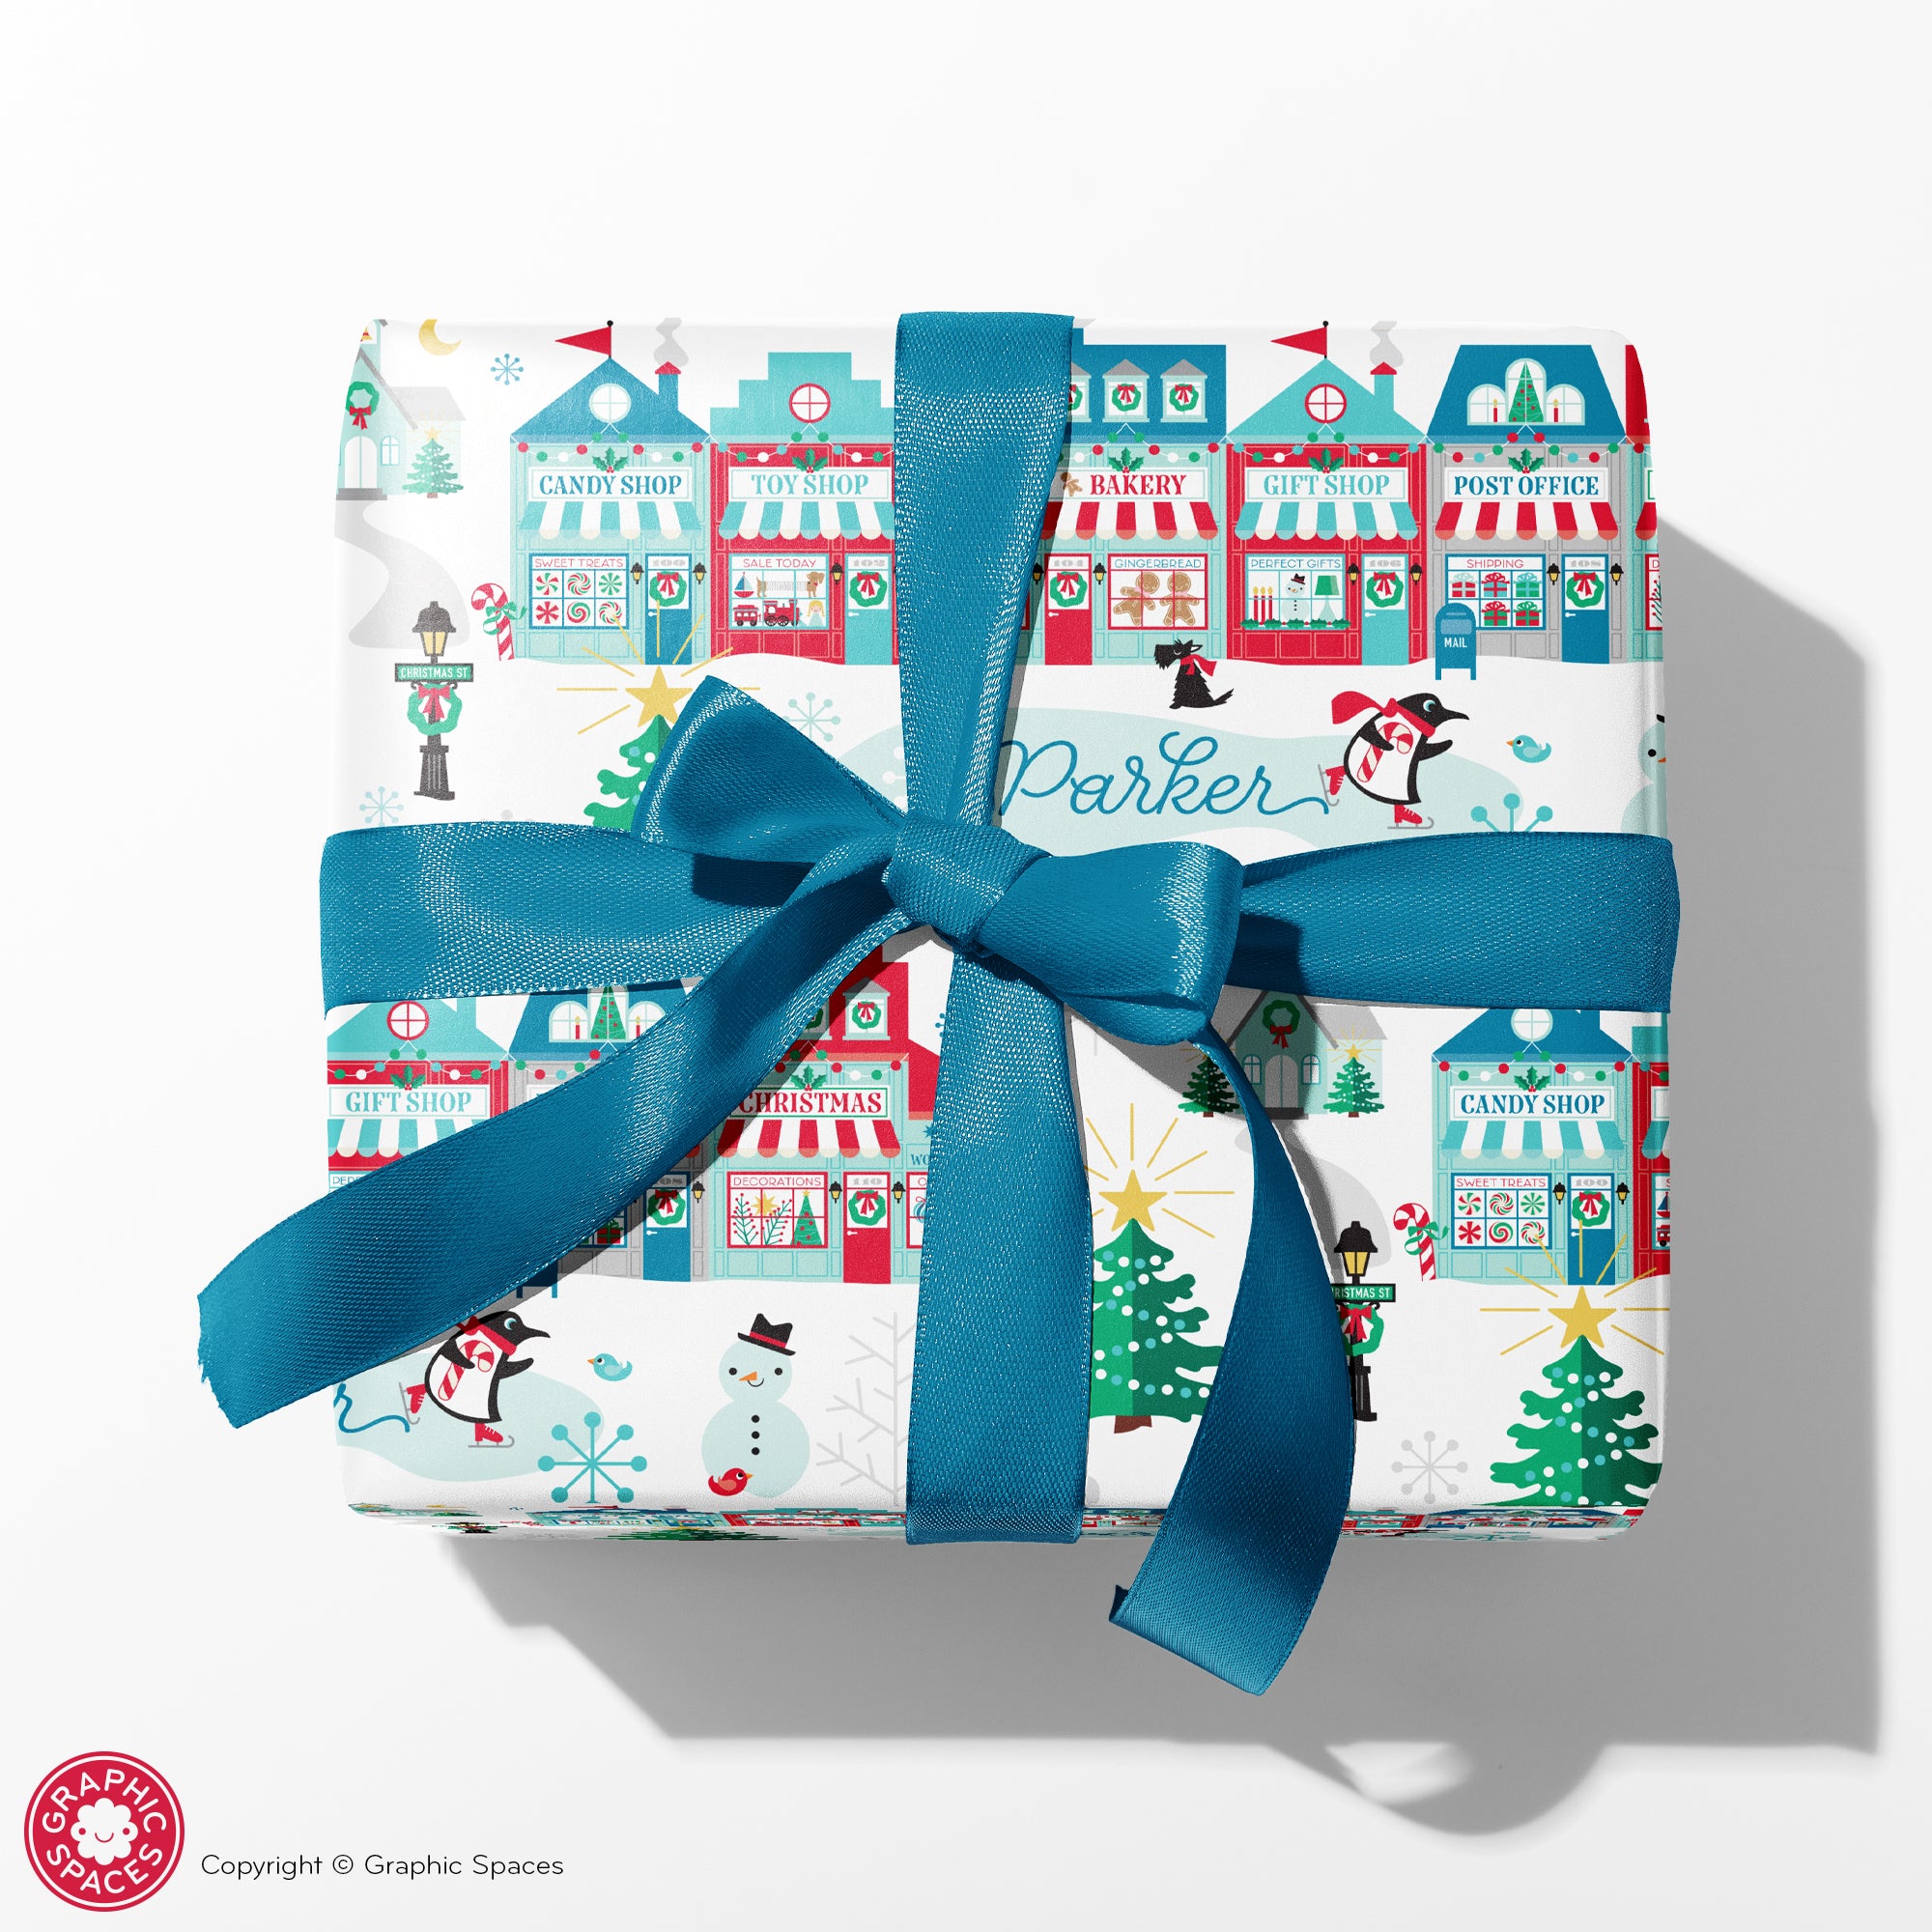 Penguin Ice Skating Christmas Wrapping Paper - Personalized Kids